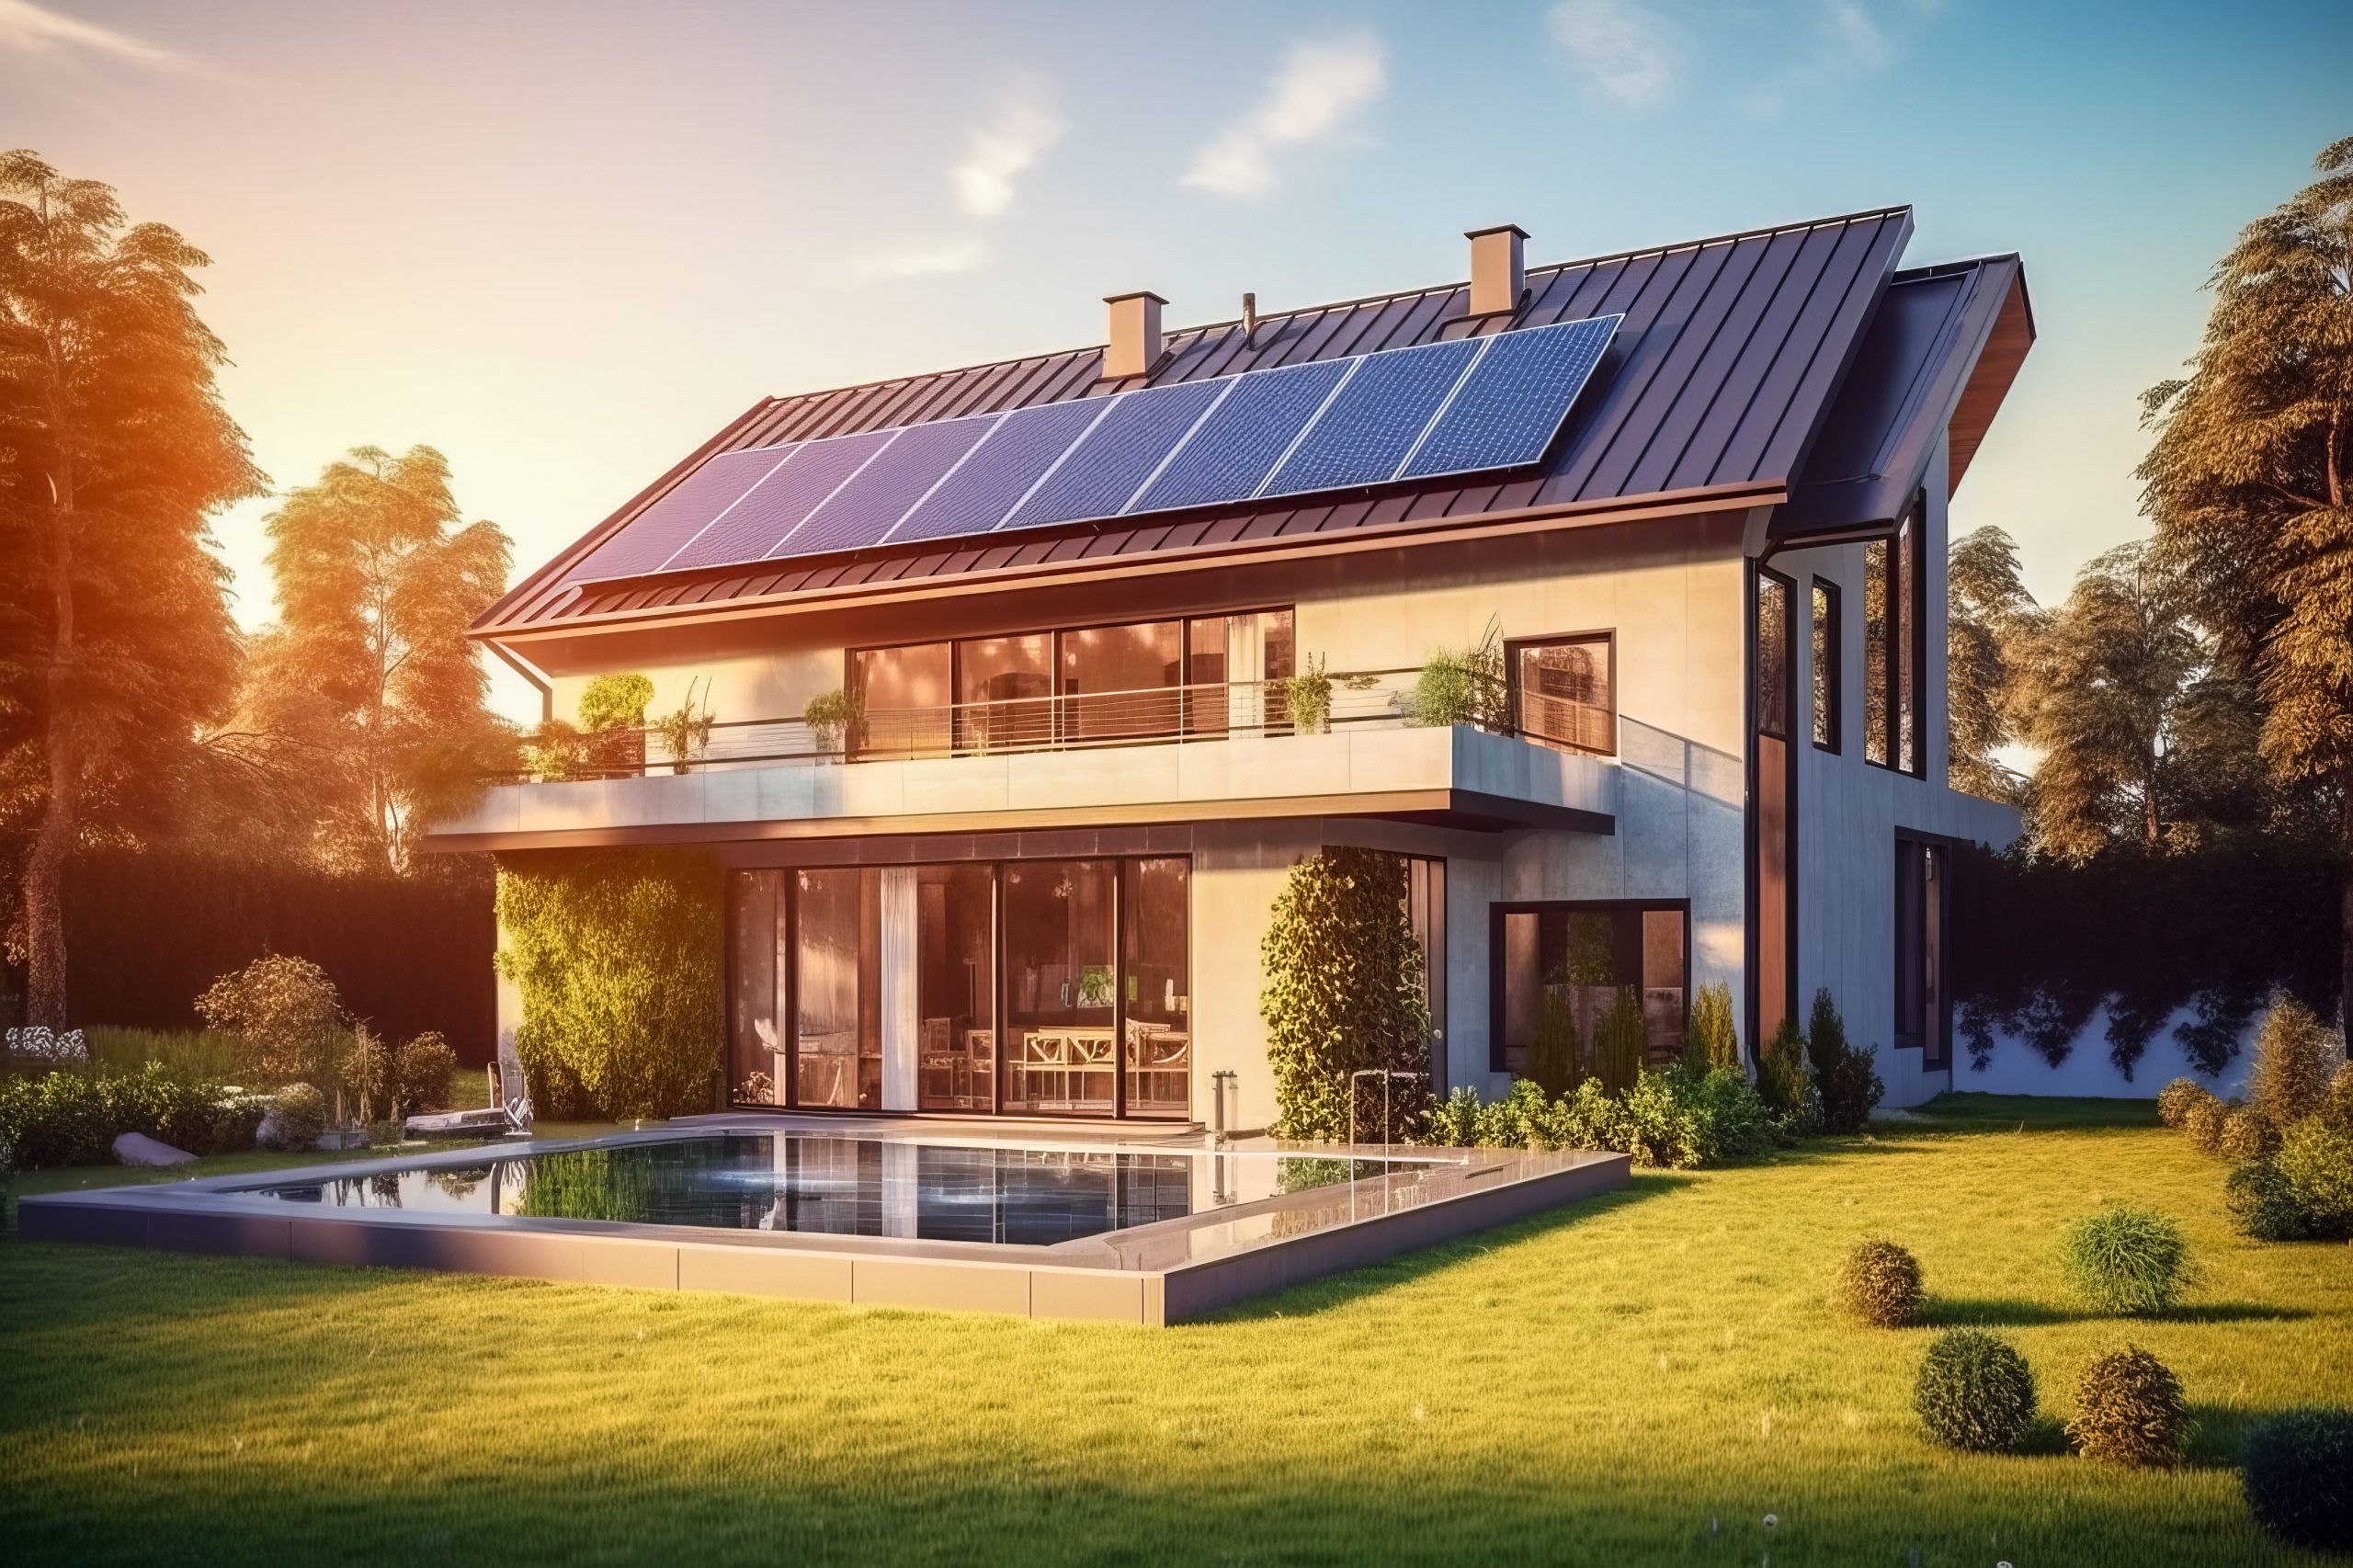 Modern family home with solar panels on roof at dawn